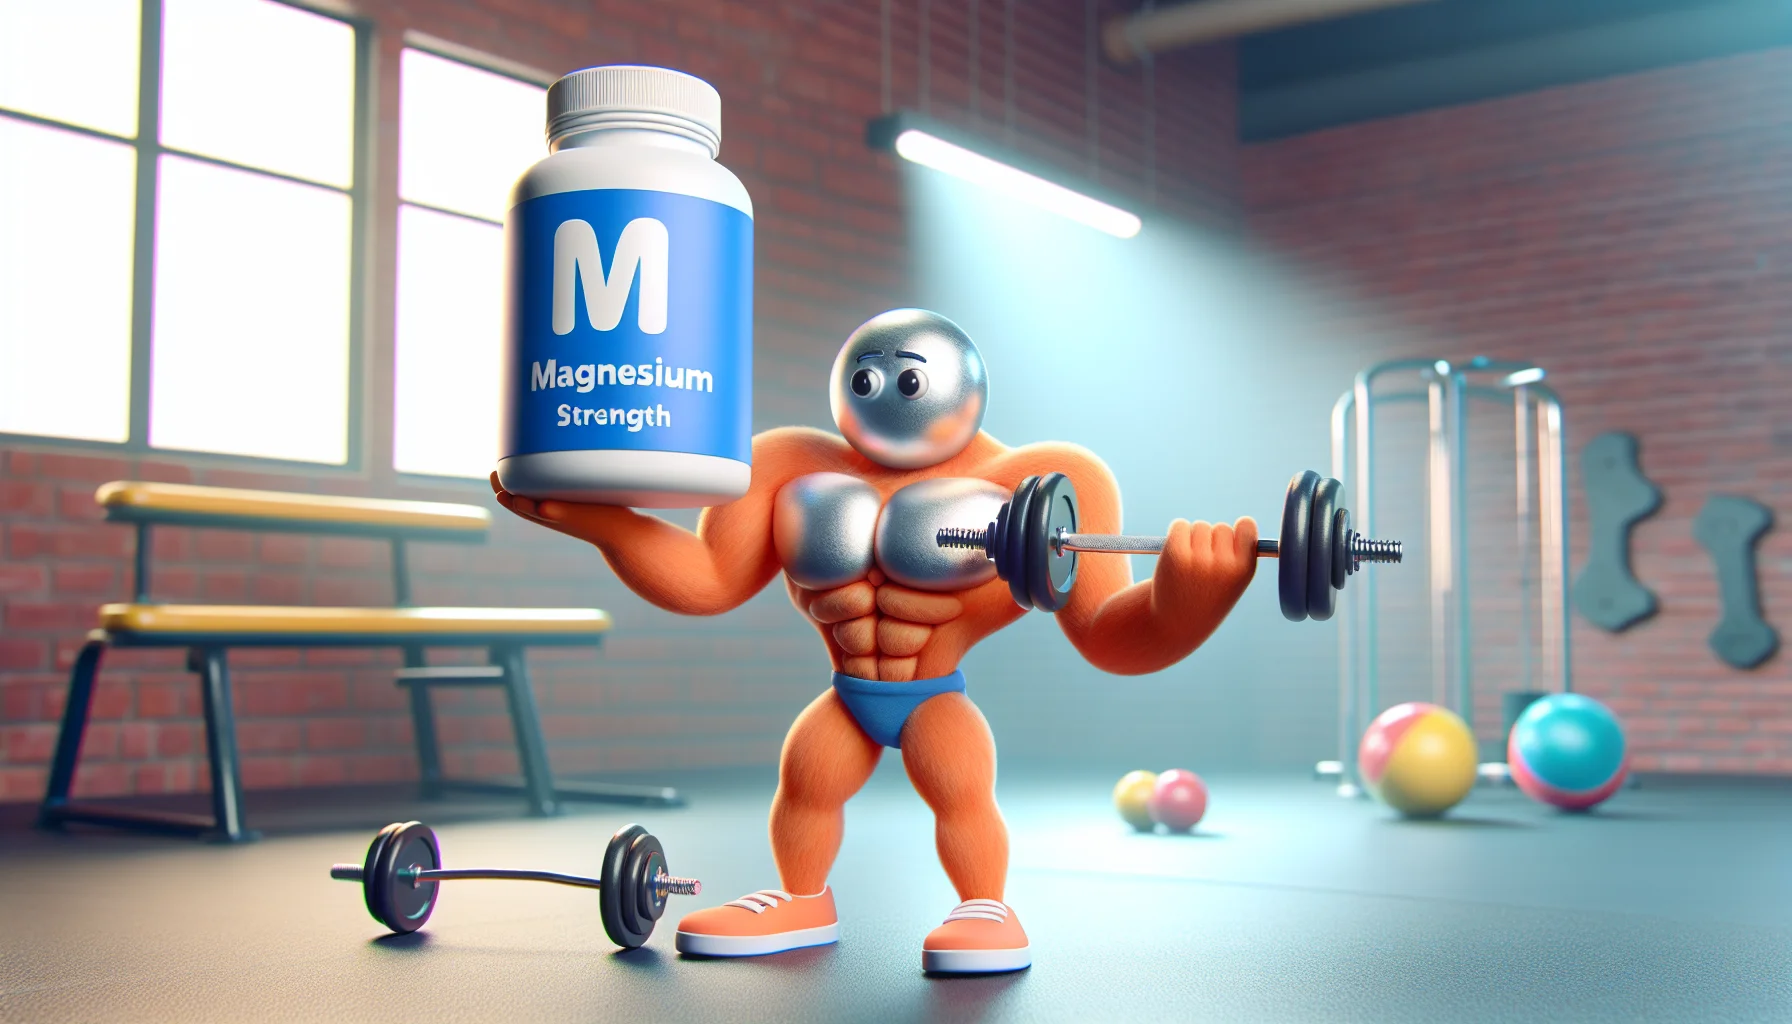 Create a whimsical image that showcases the element magnesium as a playful, humanoid character! Give the character muscular physique to indicate that it's associated with sports and physical activity. The character should be proudly presenting a bottle of magnesium supplements labelled as 'Sporty Strength', enticing the viewers to try them out. The scenario could be set in a colorful gym, where our magnesium character is lifting weights with one hand while holding the supplement bottle in the other. Make sure the overall tone is lighthearted and engaging, meant to boost the viewers' interest in sports supplements.